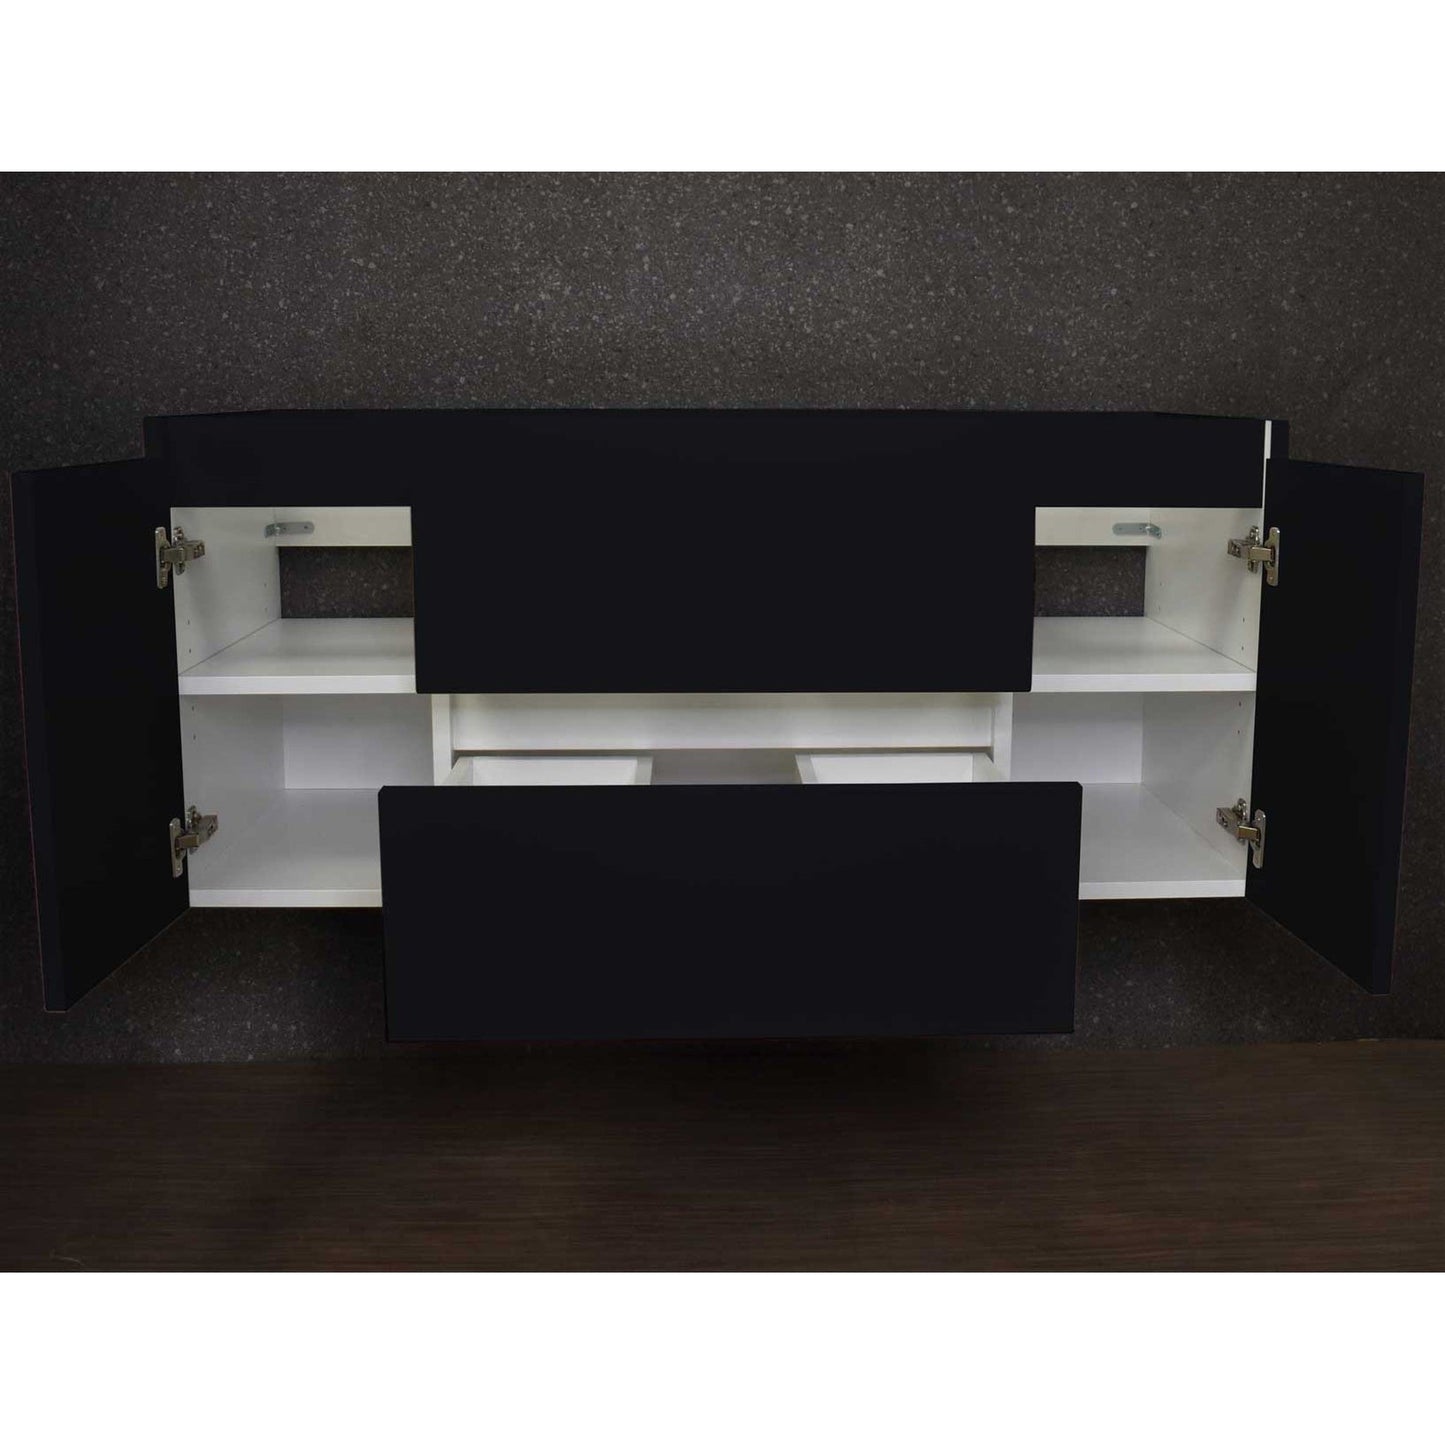 Volpa USA Salt 48" x 18" Glossy Black Wall-Mounted Floating Bathroom Vanity Cabinet with Drawers